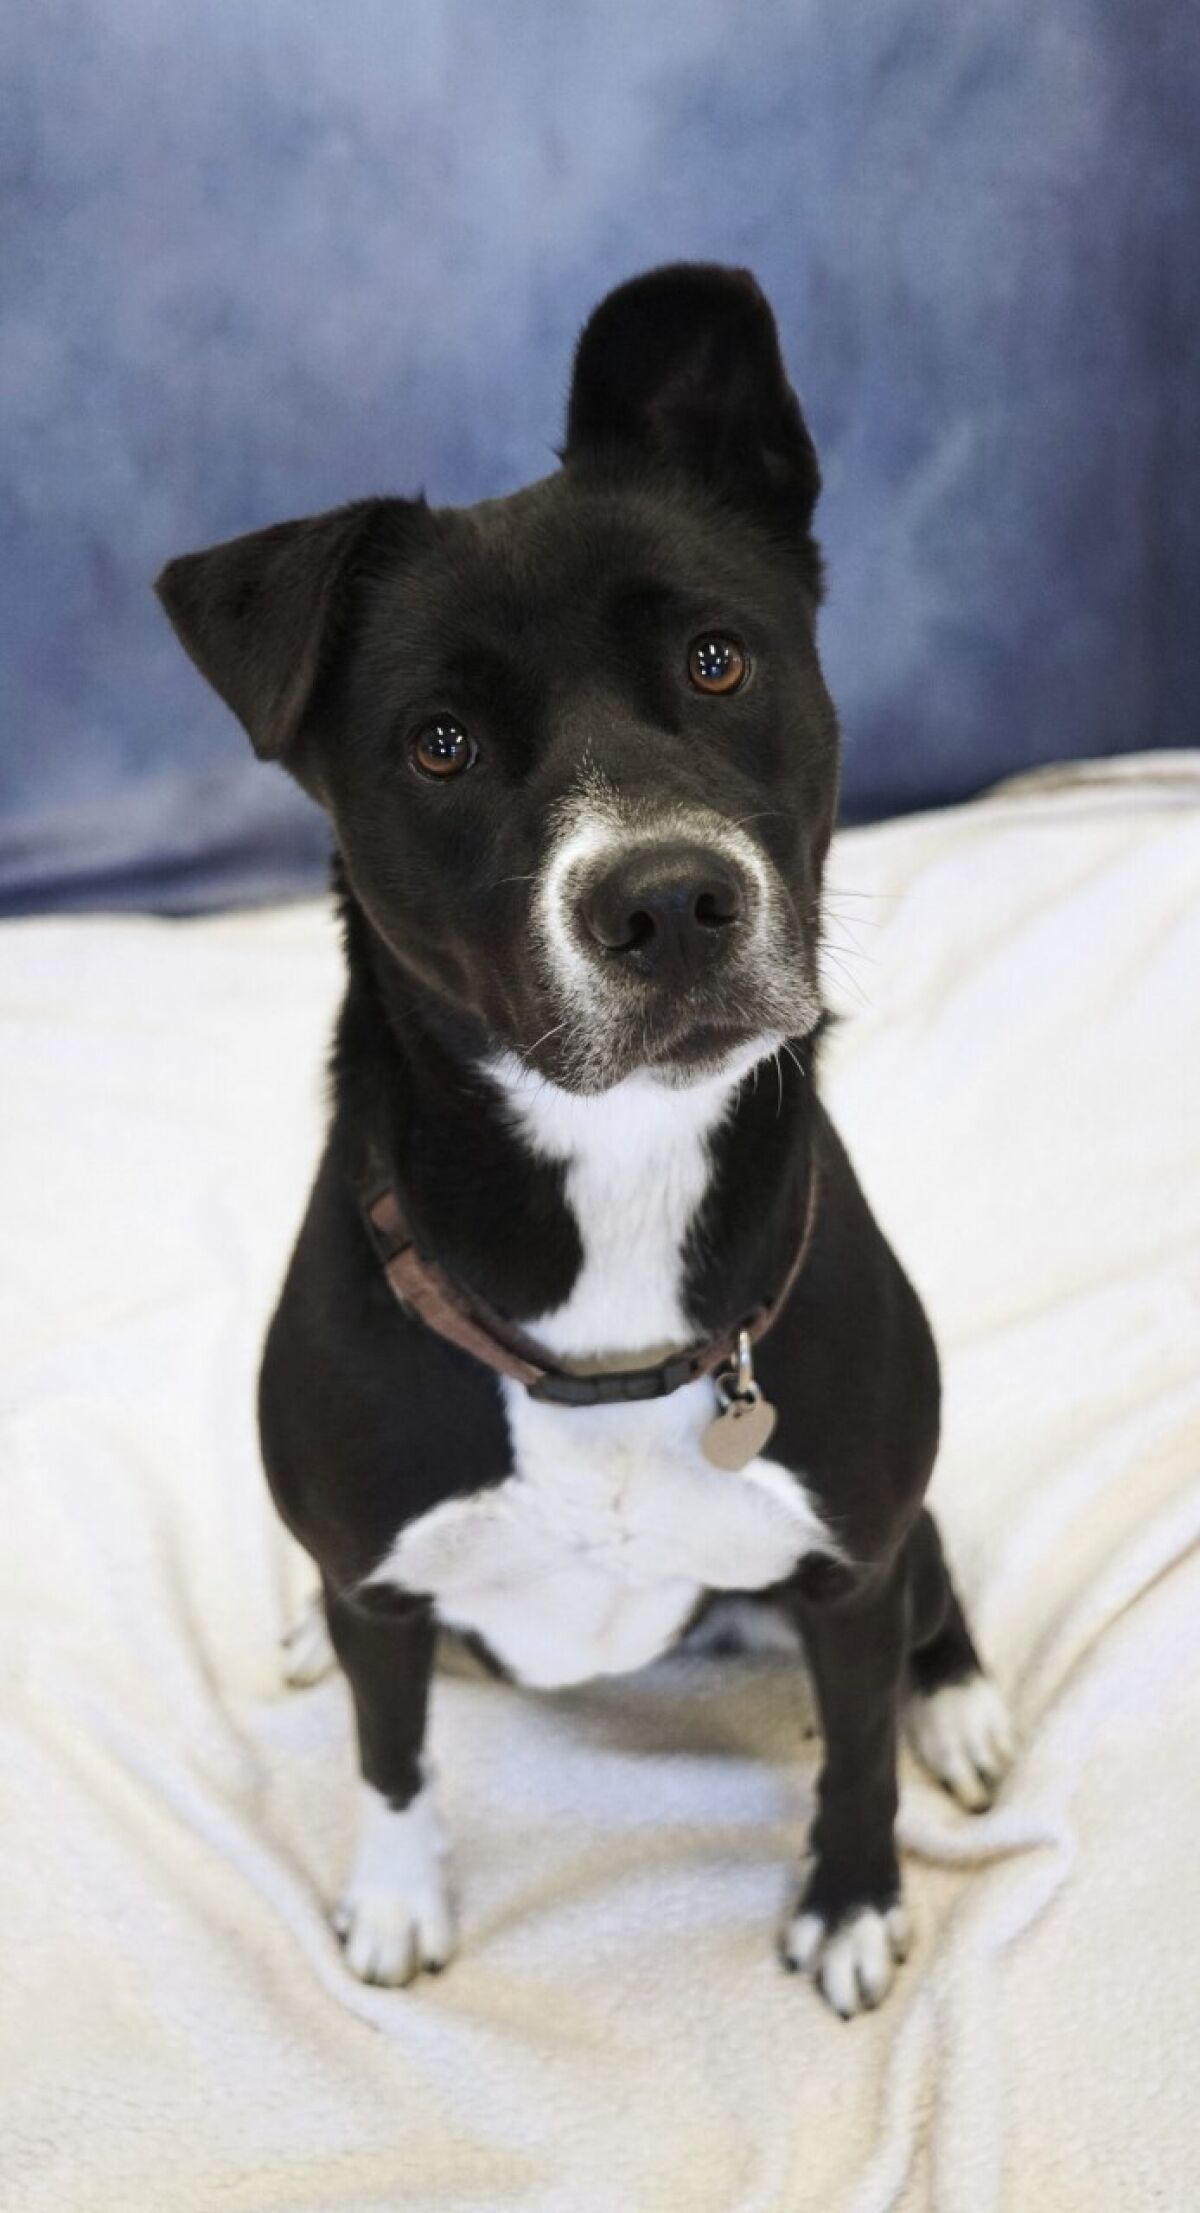 Pet of the week is border collie mix.